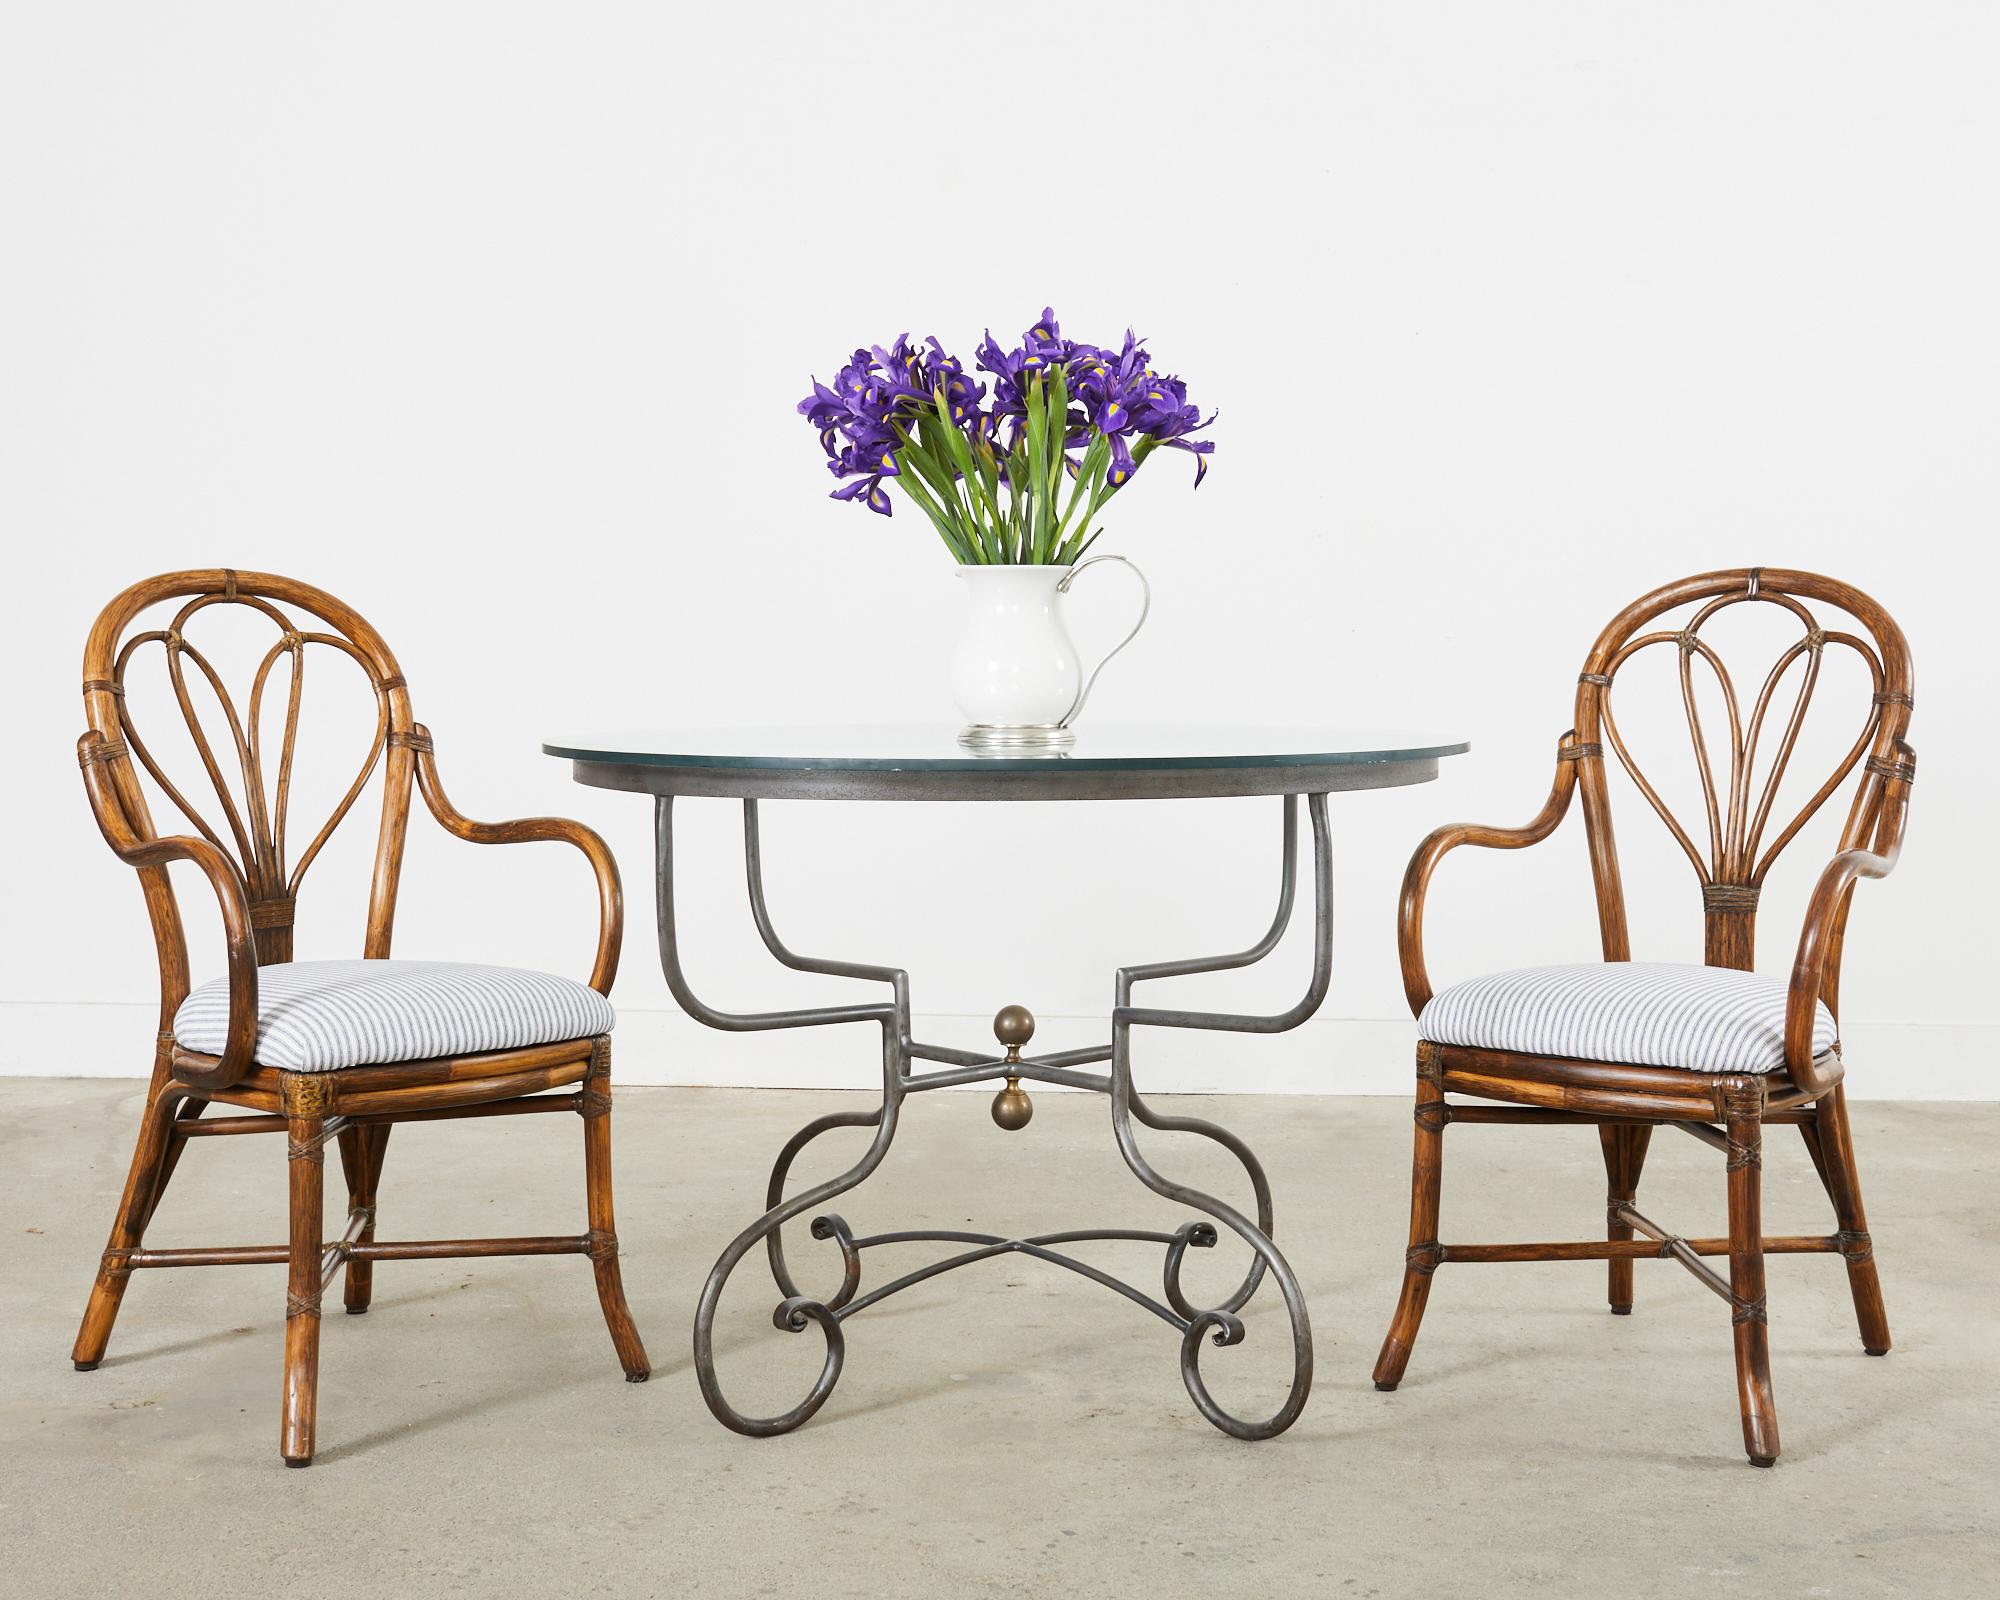 Rare set of four organic modern bent rattan dining armchairs made in the bistro cafe art nouveau style after Thonet. Made by McGuire the chairs feature a sinuous frame with a floral fan motif back. Gracefully curved arms conjoined to a newly